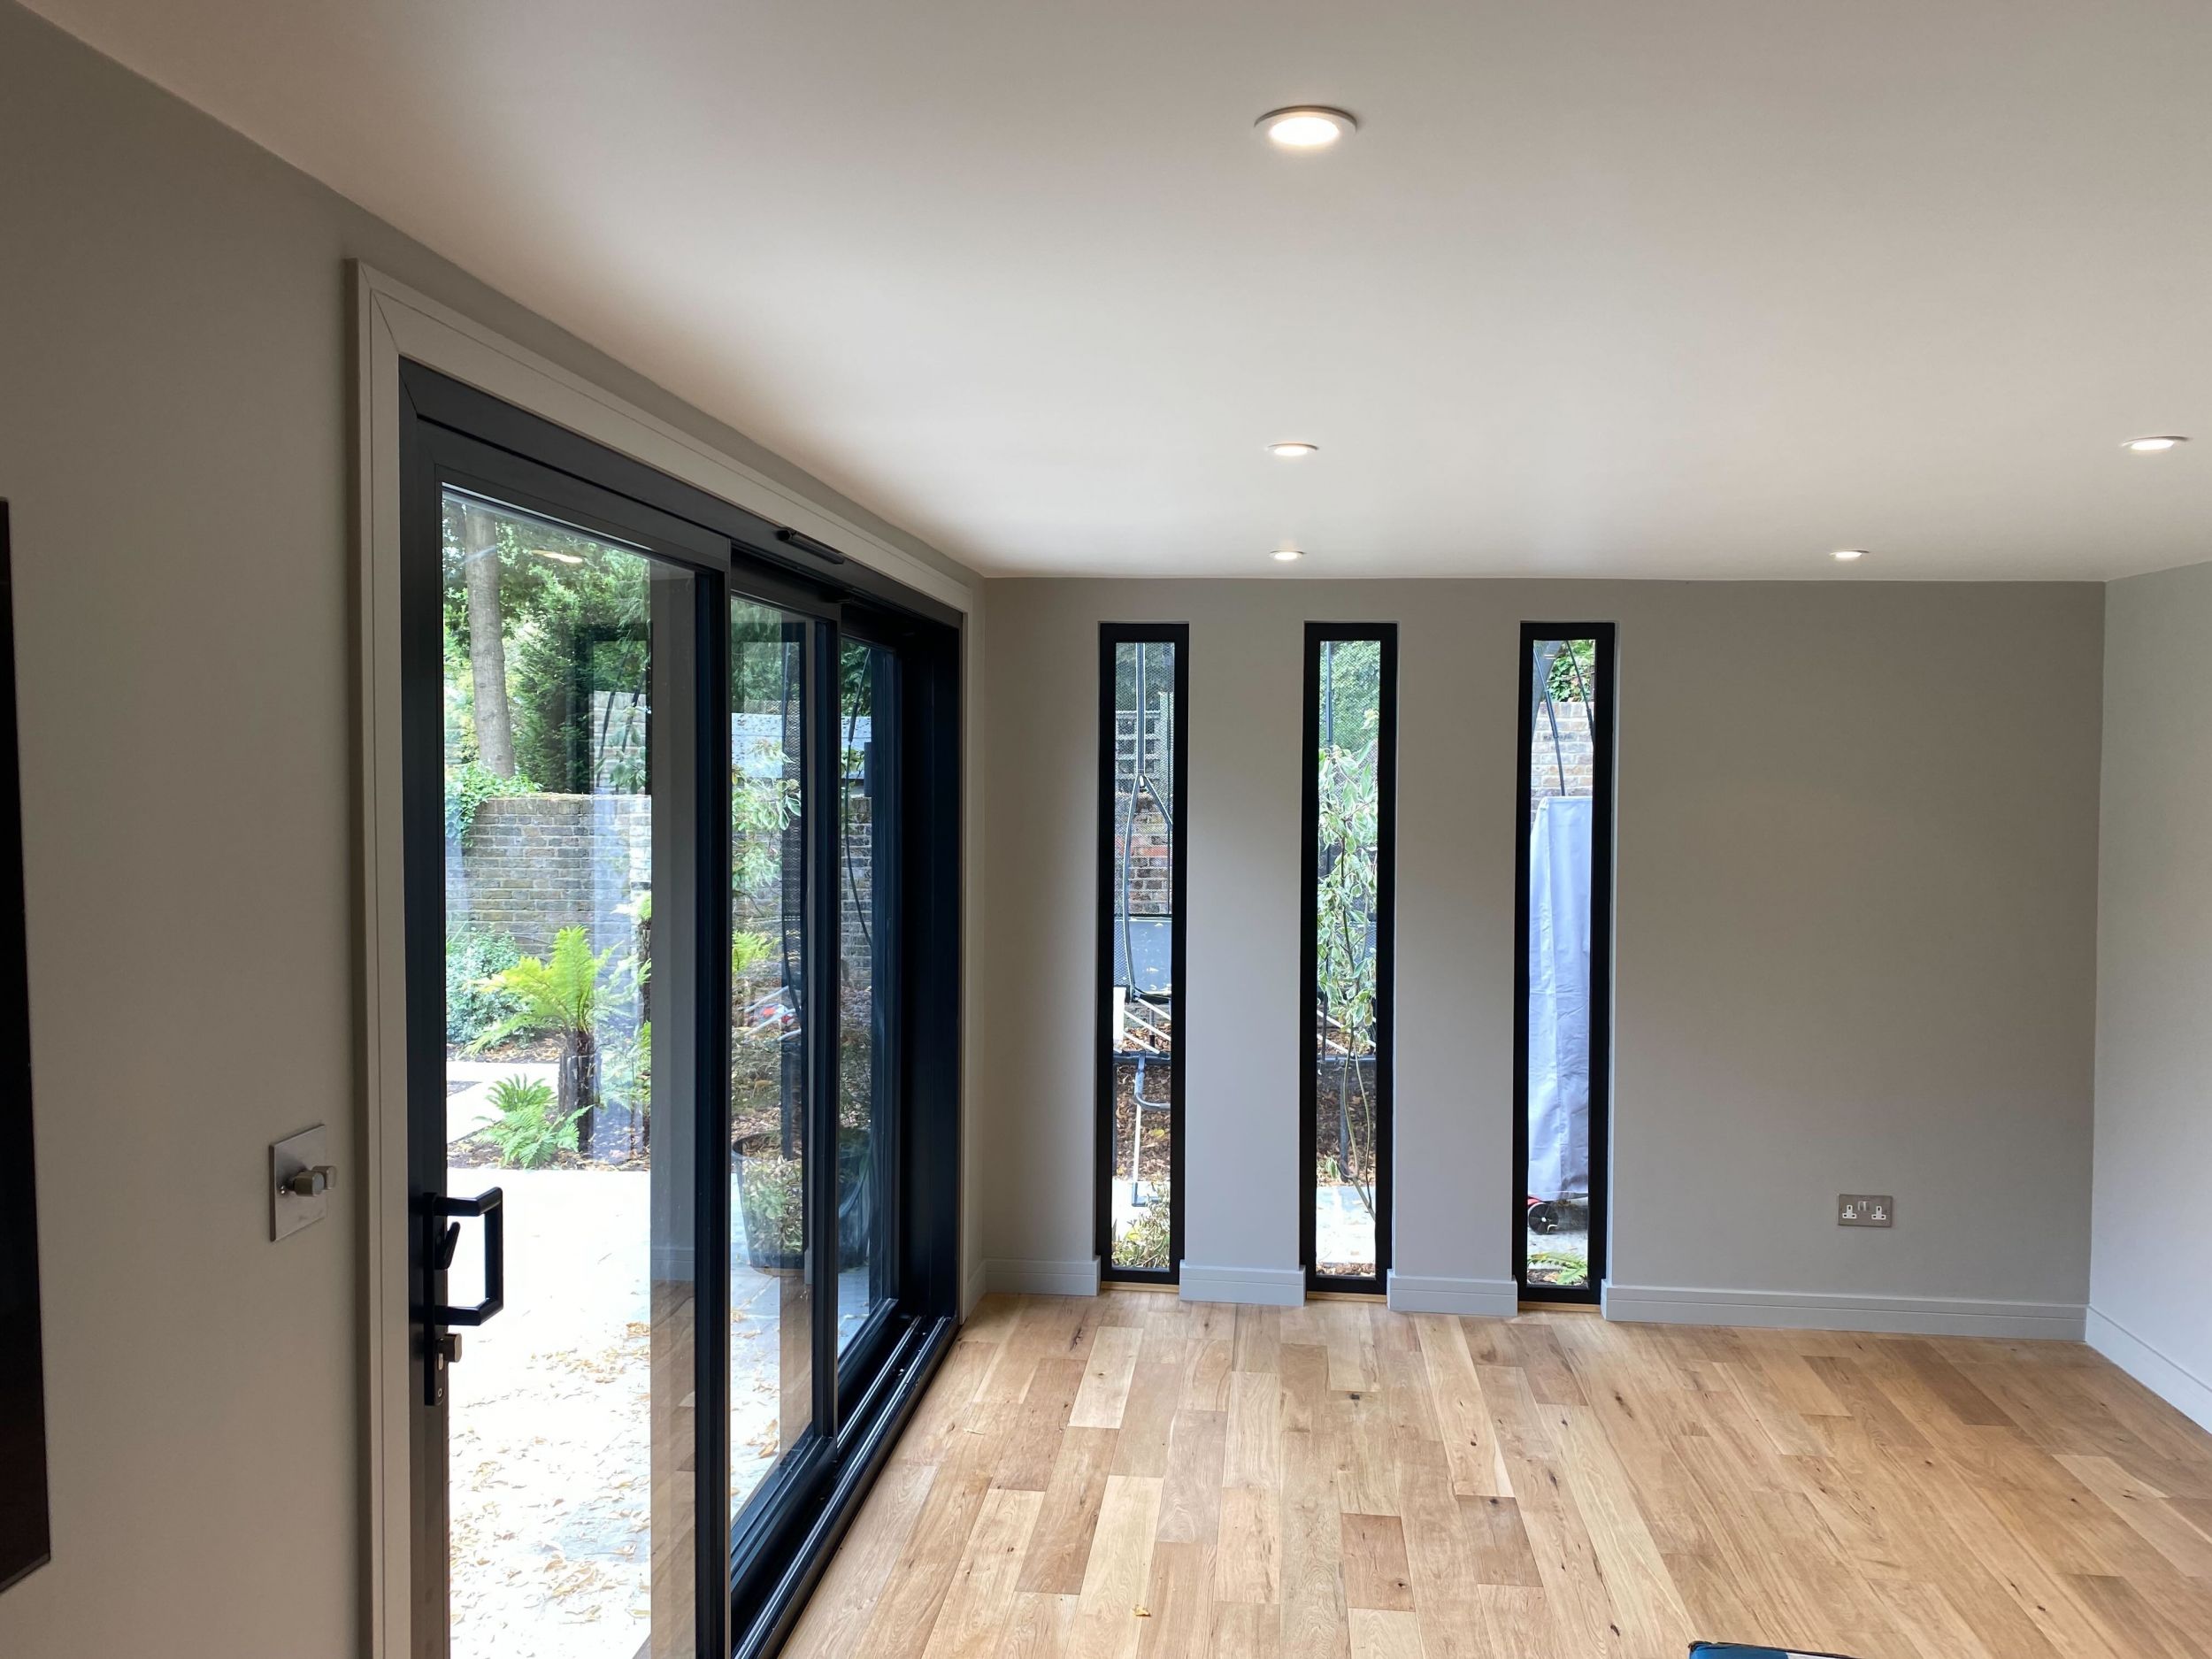 View from inside a room with white walls and glass doors